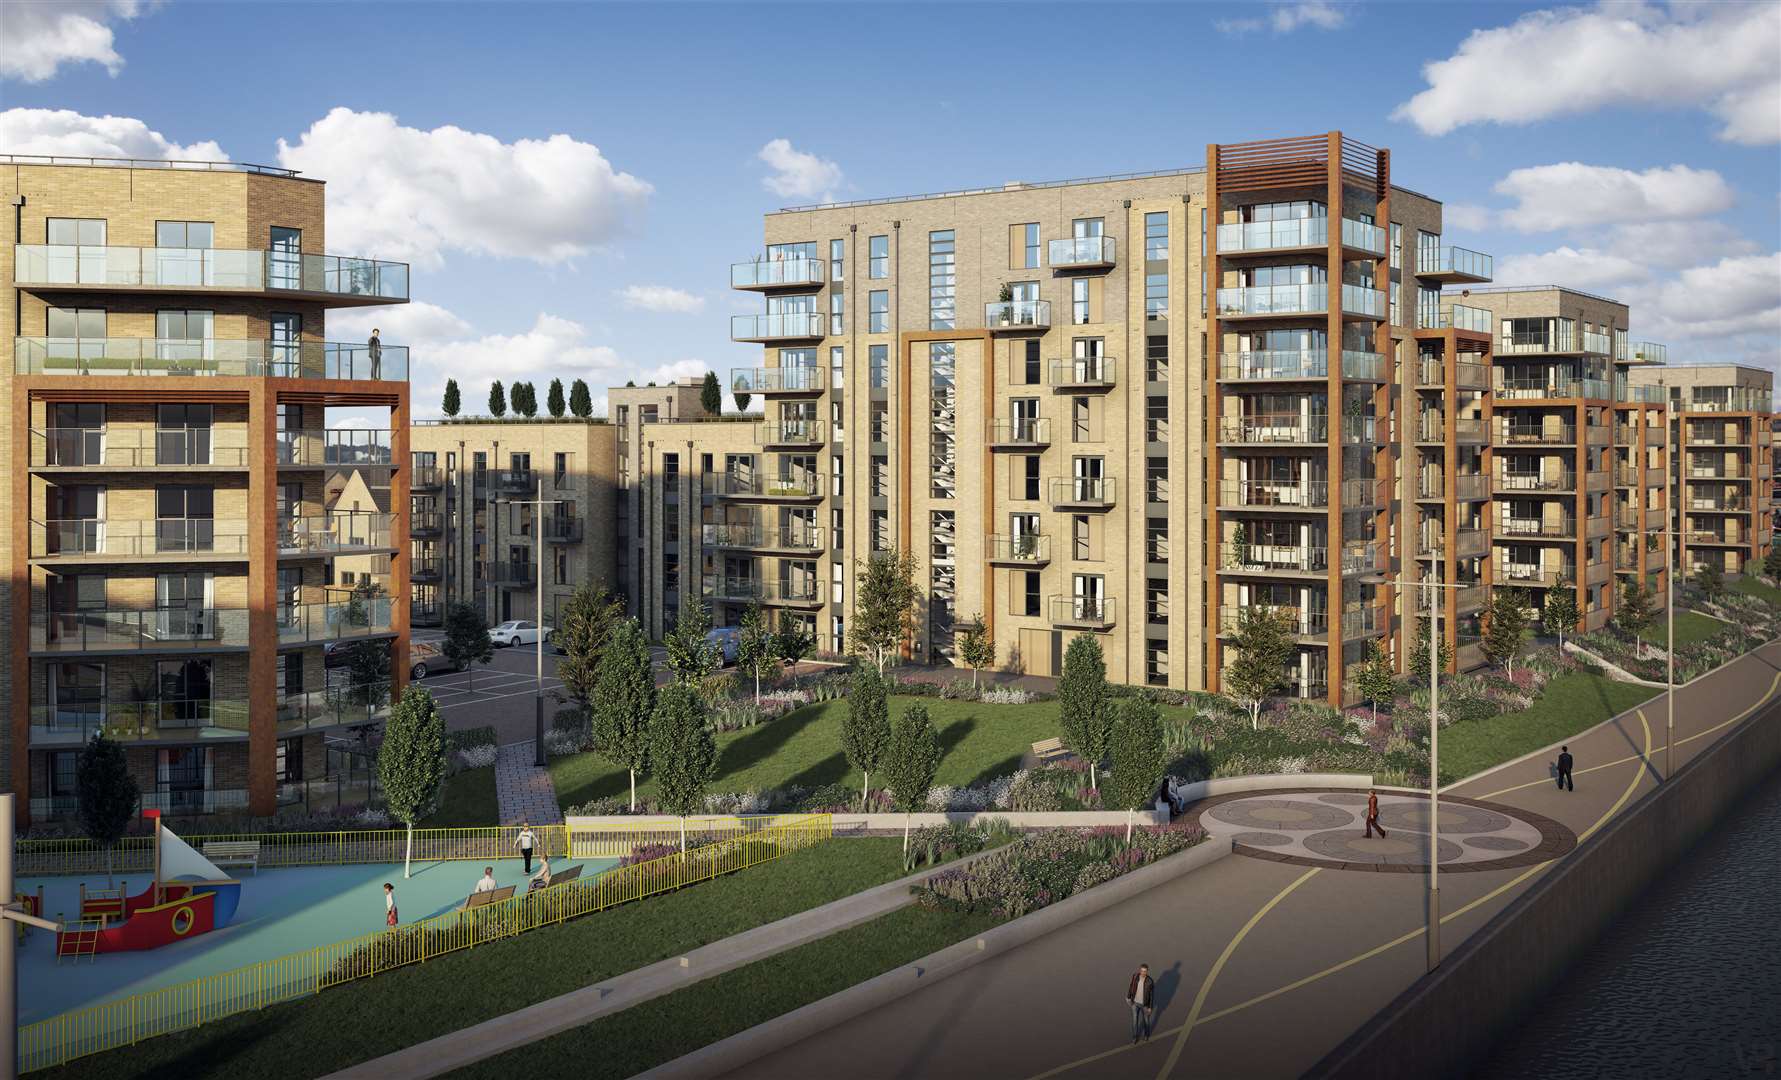 The 224 affordable homes will be part of the Ebbsfleet Garden City project. Picture: Keepmoat Homes